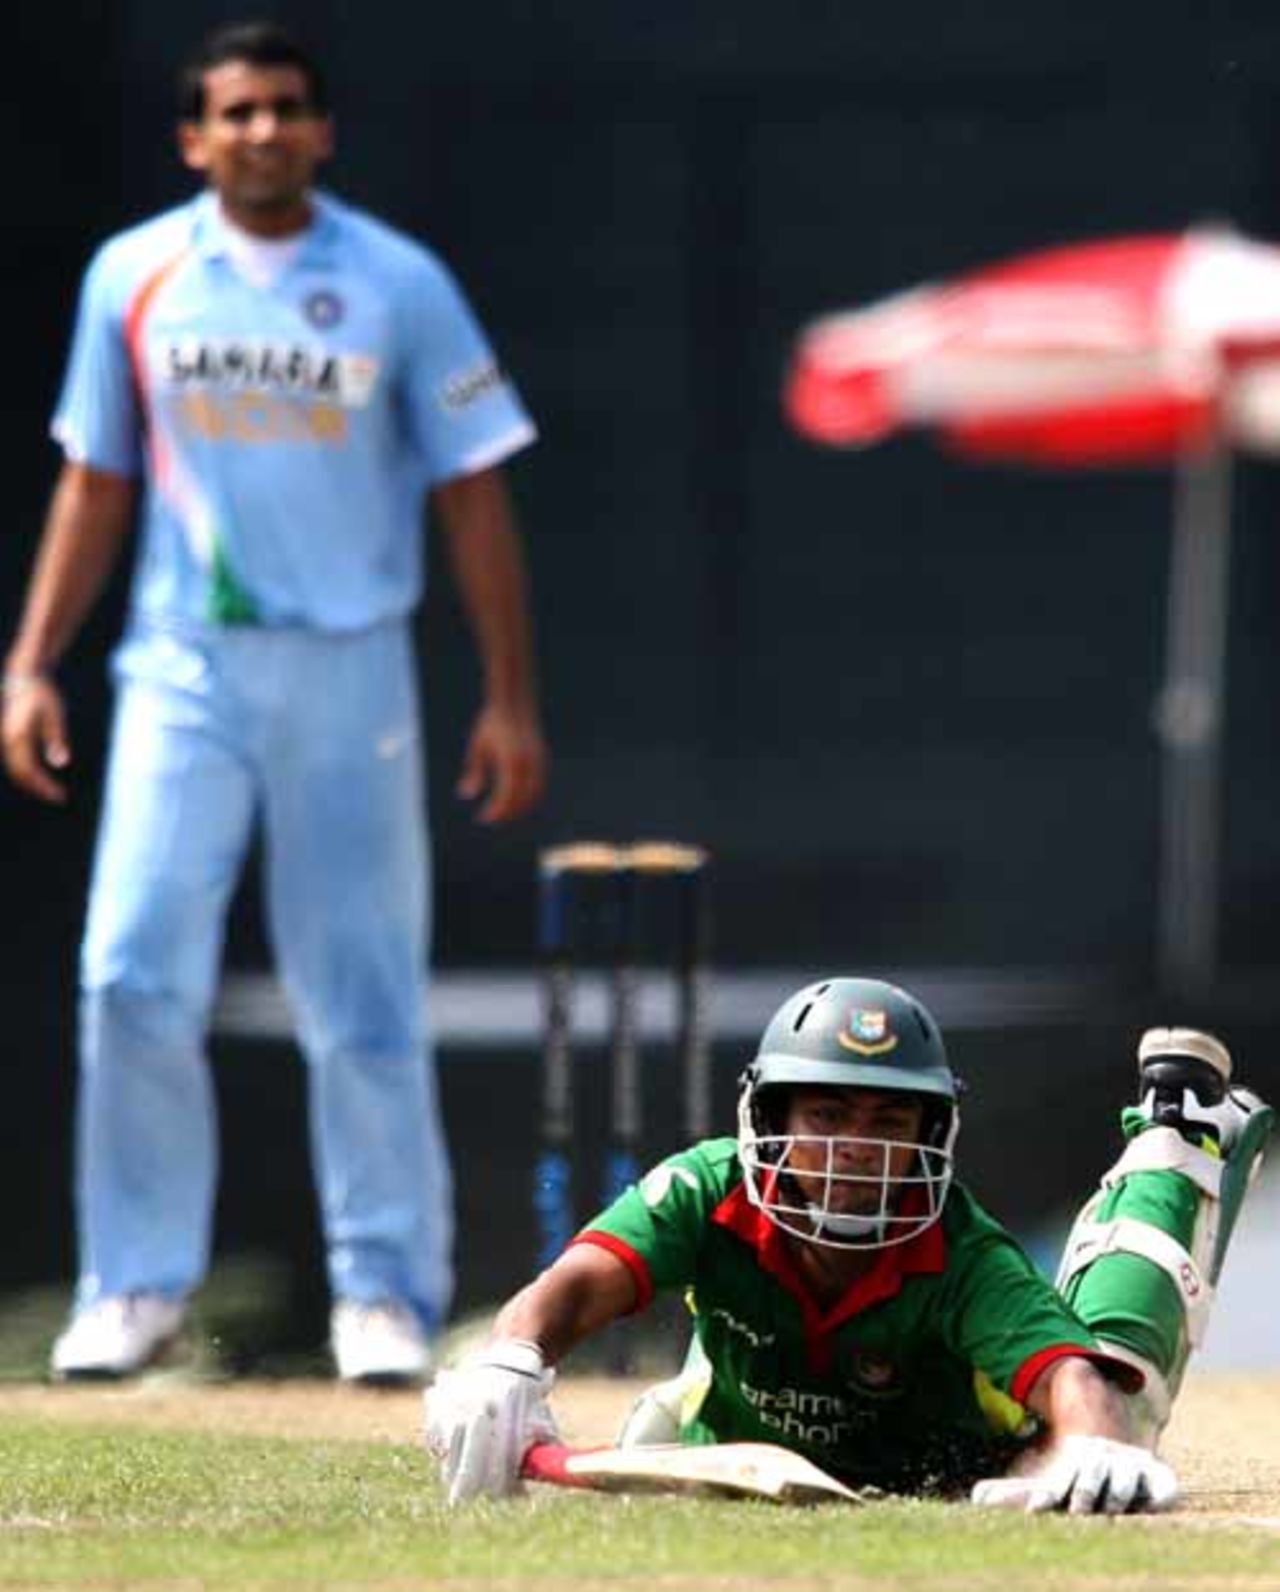 Tamim Iqbal made a hash of the chase getting himself run out for seven in the fifth over, Bangladesh v India, 2nd ODI, Mirpur, May 12, 2007